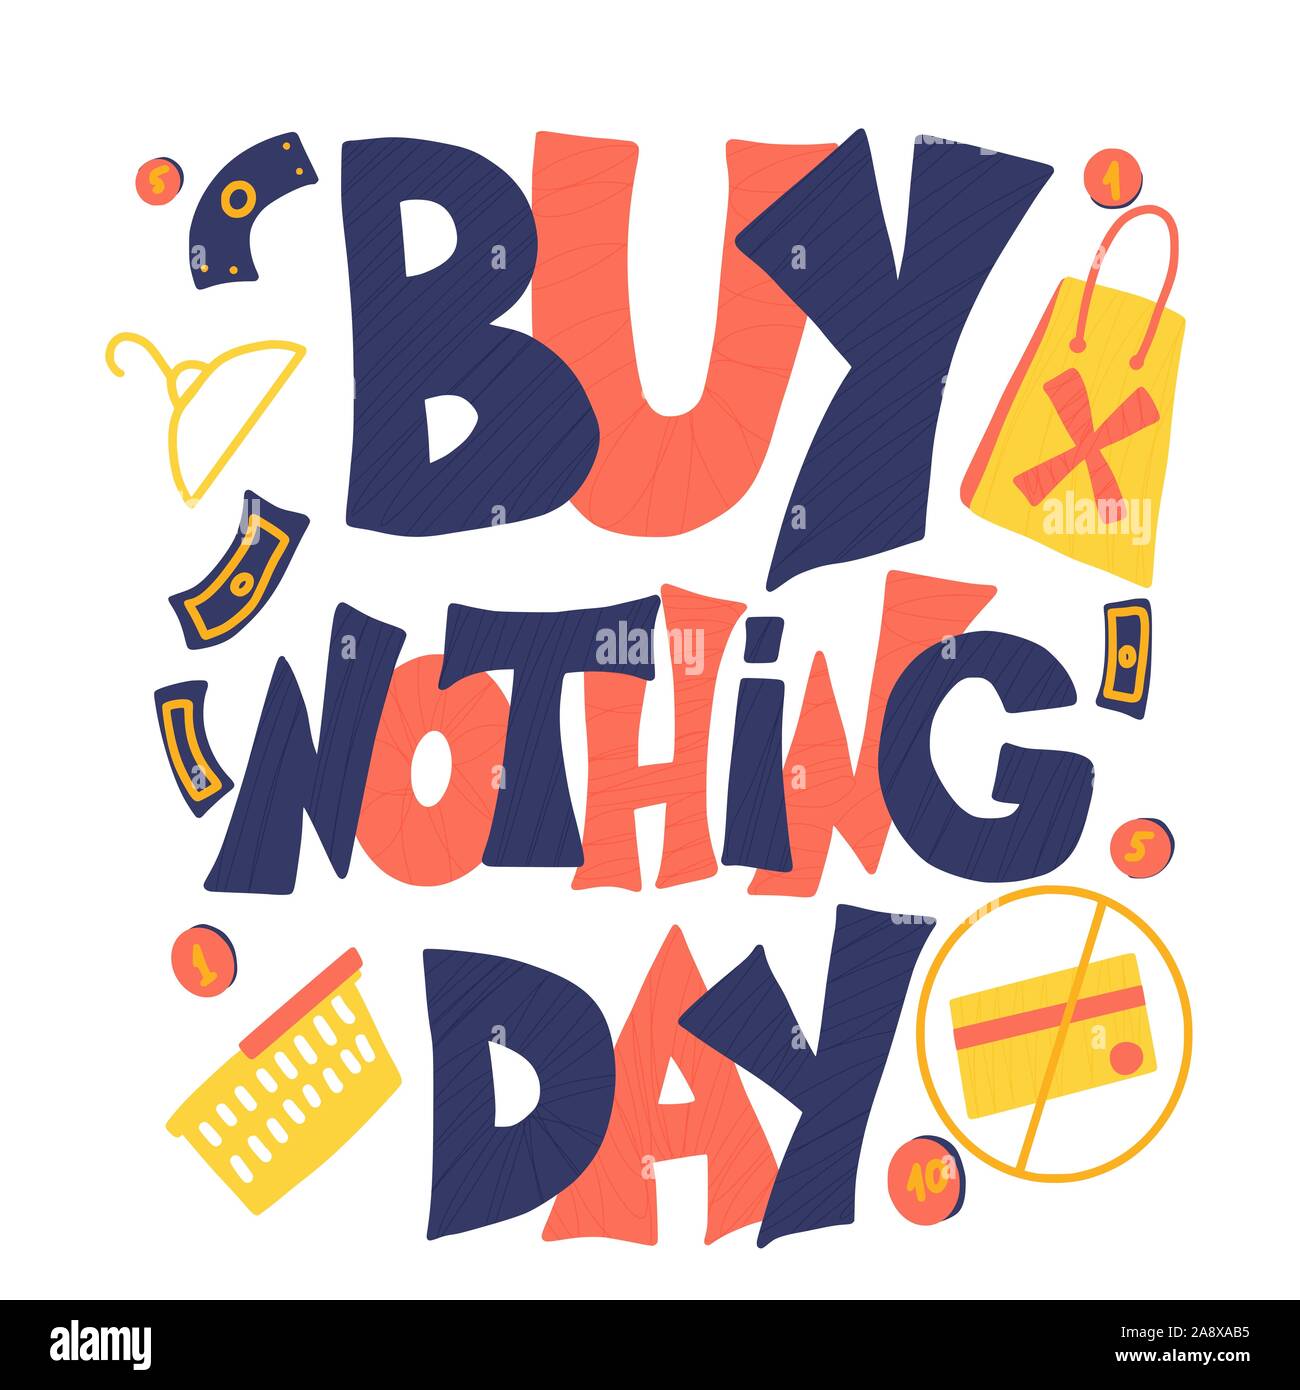 Buy nothing day text. Stop shopping symbol date. International day of protest against consumerism. Vector color illustration with stylized quote. Stock Vector